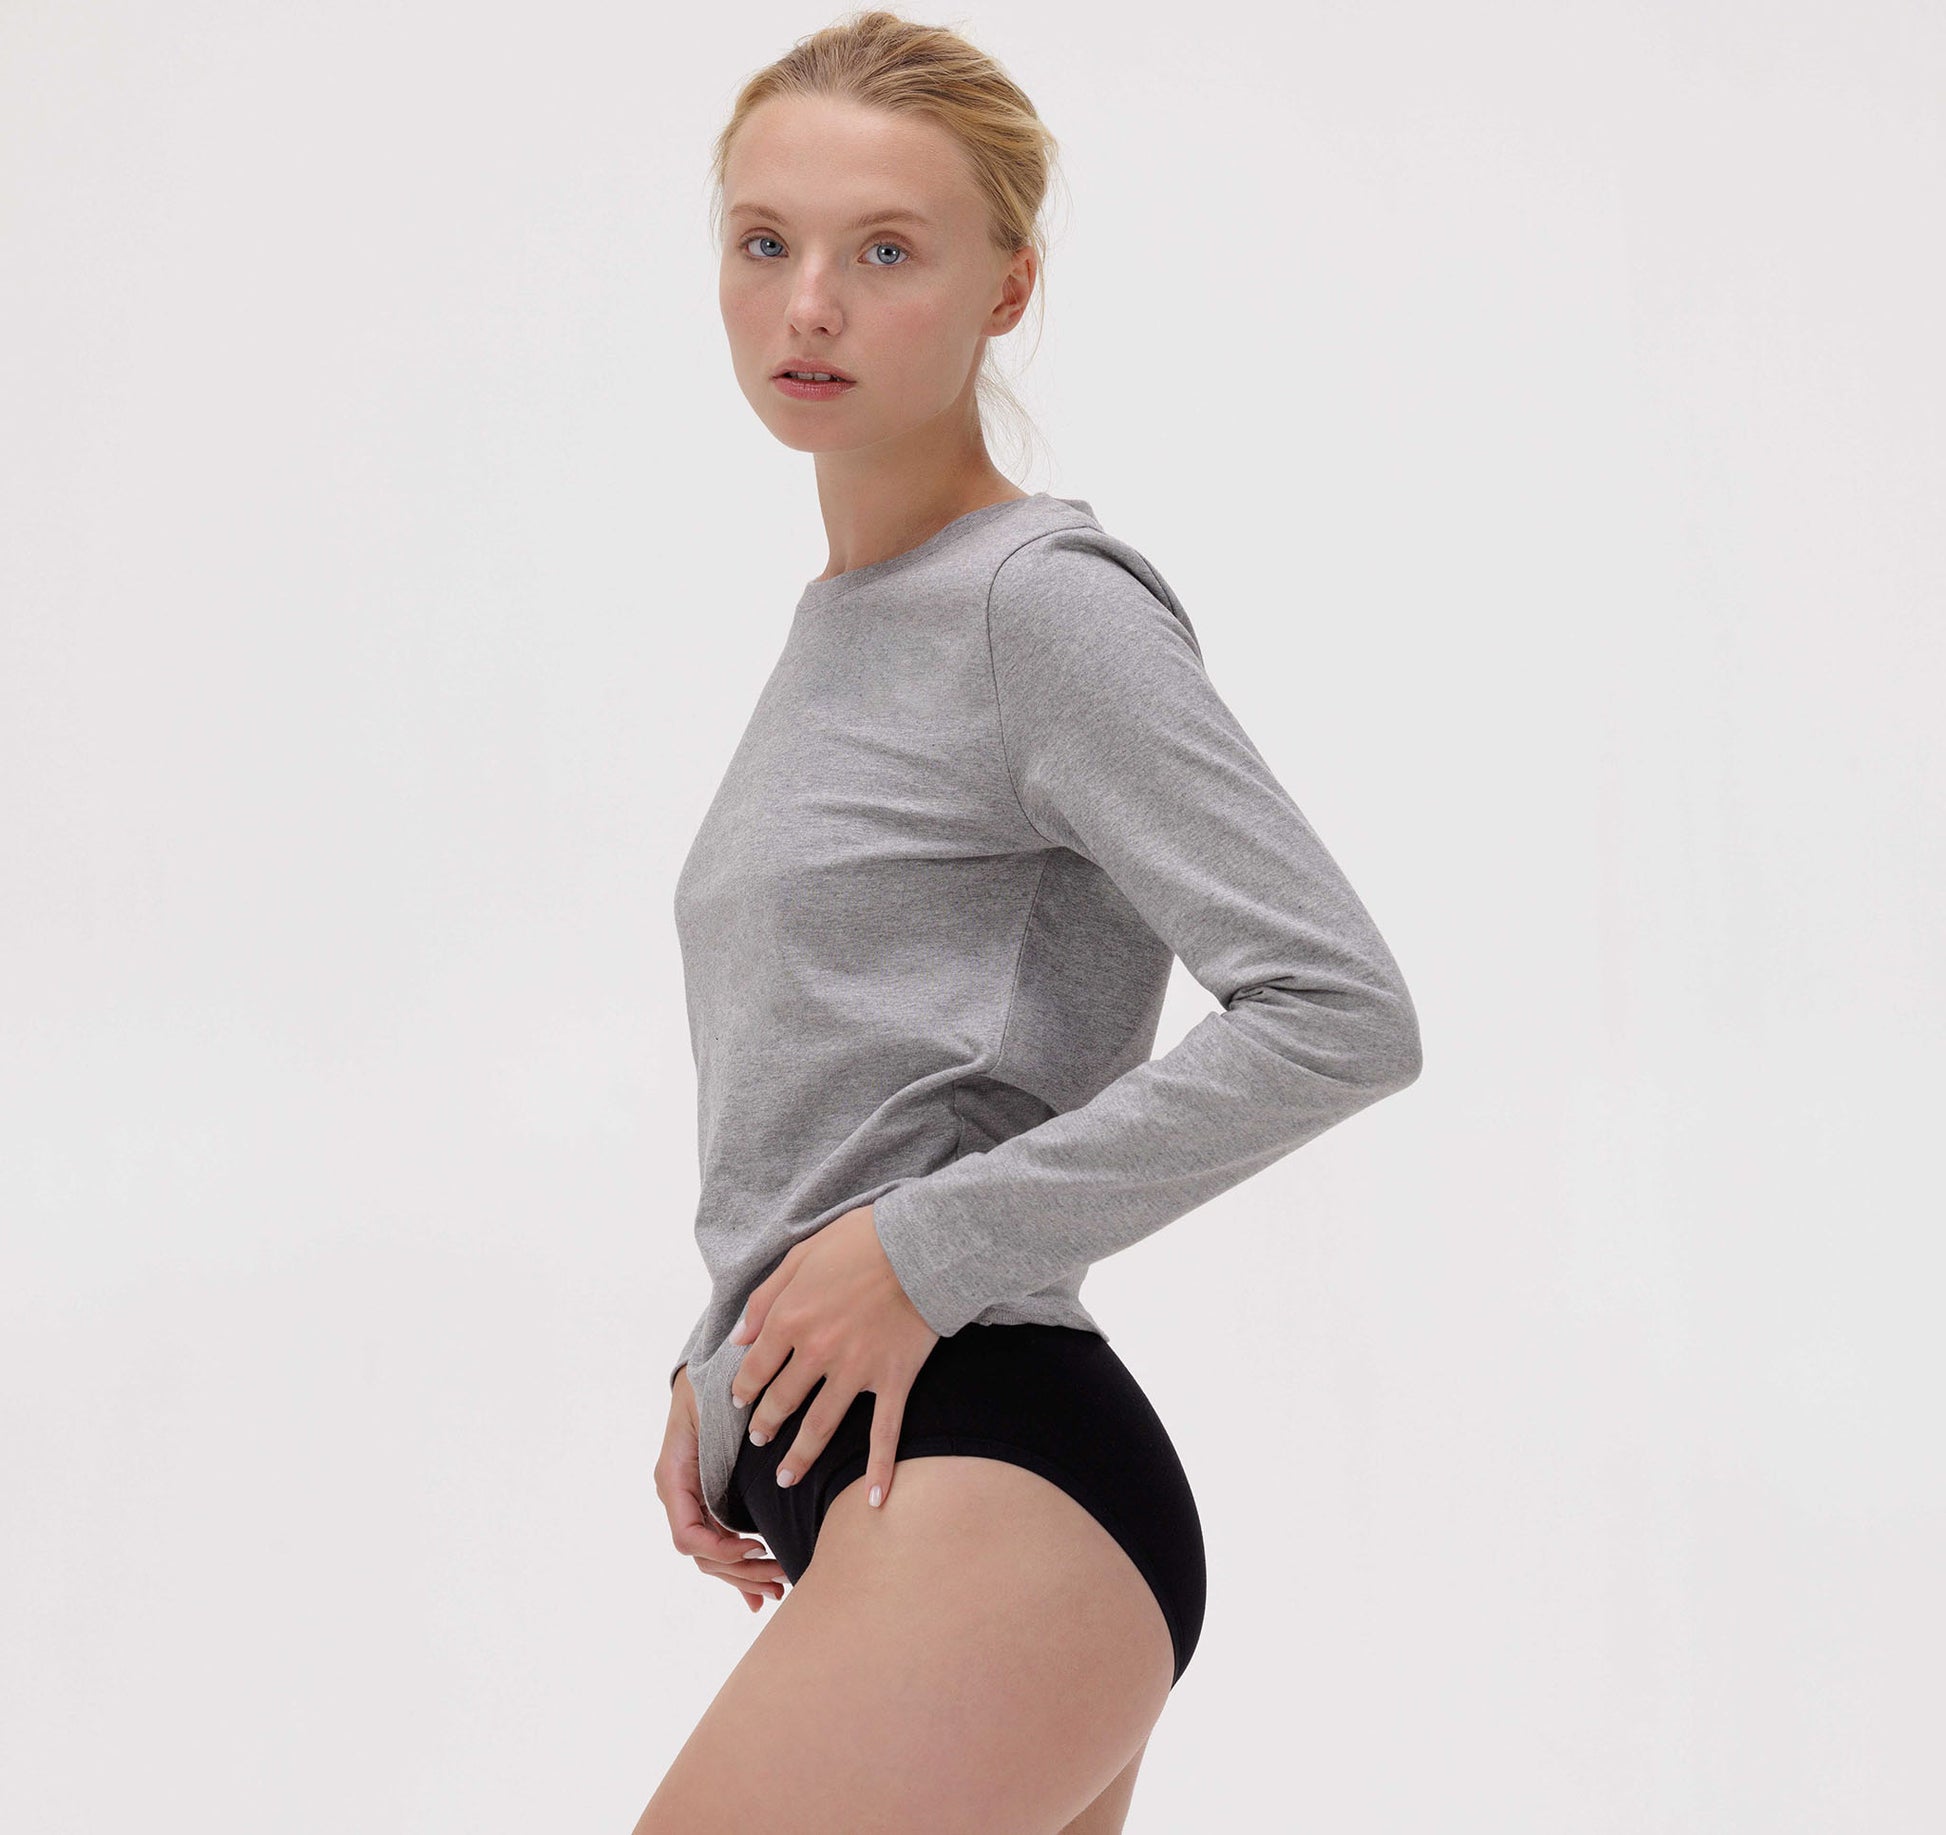 Buy Slate Grey Underwear - Organic Cotton & Naturally Dyed - Pack of 2  Online on Brown Living